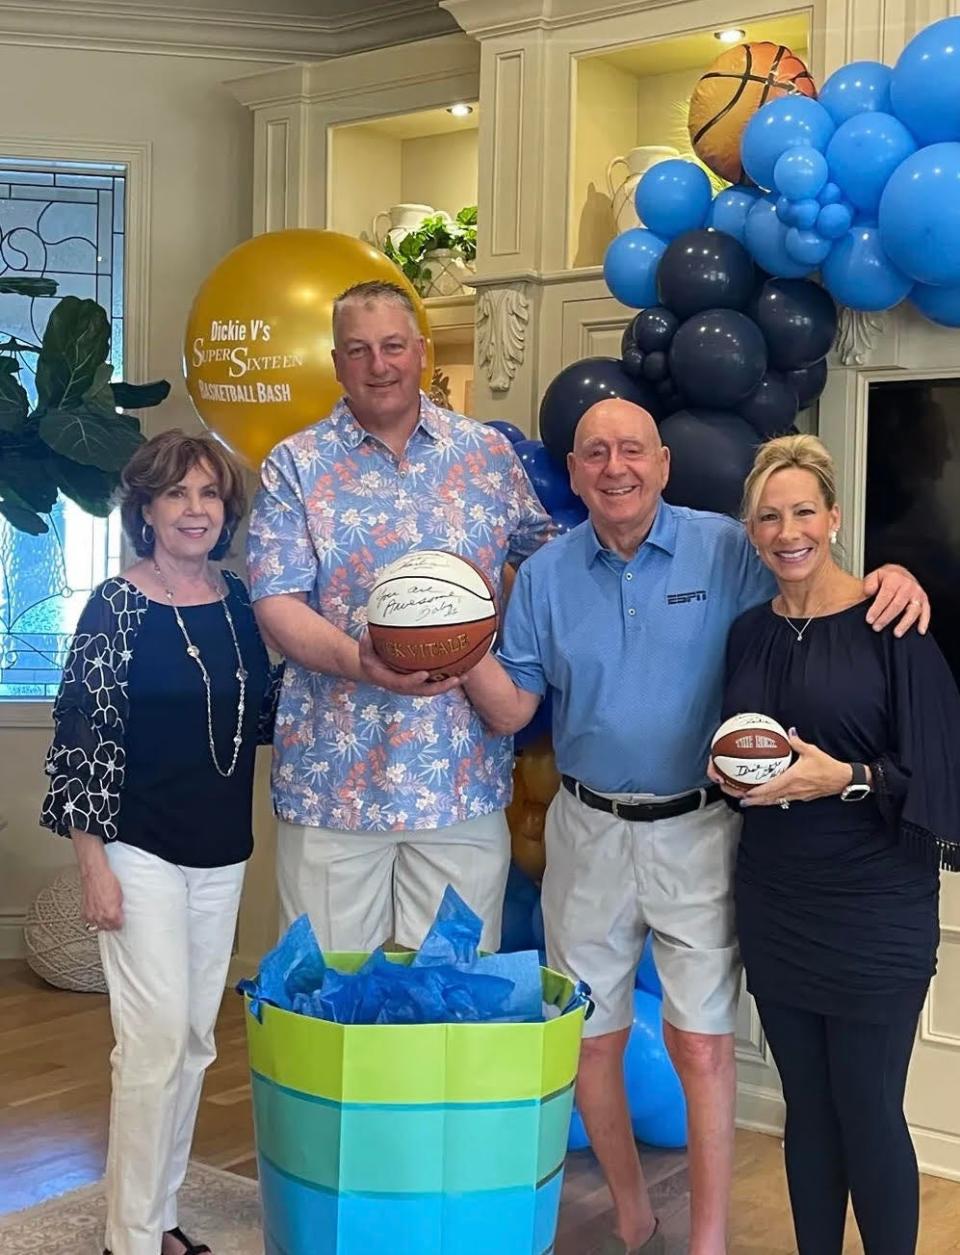 From left, Lorraine Vitale, Charlie Johnson, Dick Vitale, and Tammie Johnson at Vitale's home in Lakewood Ranch. Last year, Tammie won the first Super Sixteen Basketball Bash.